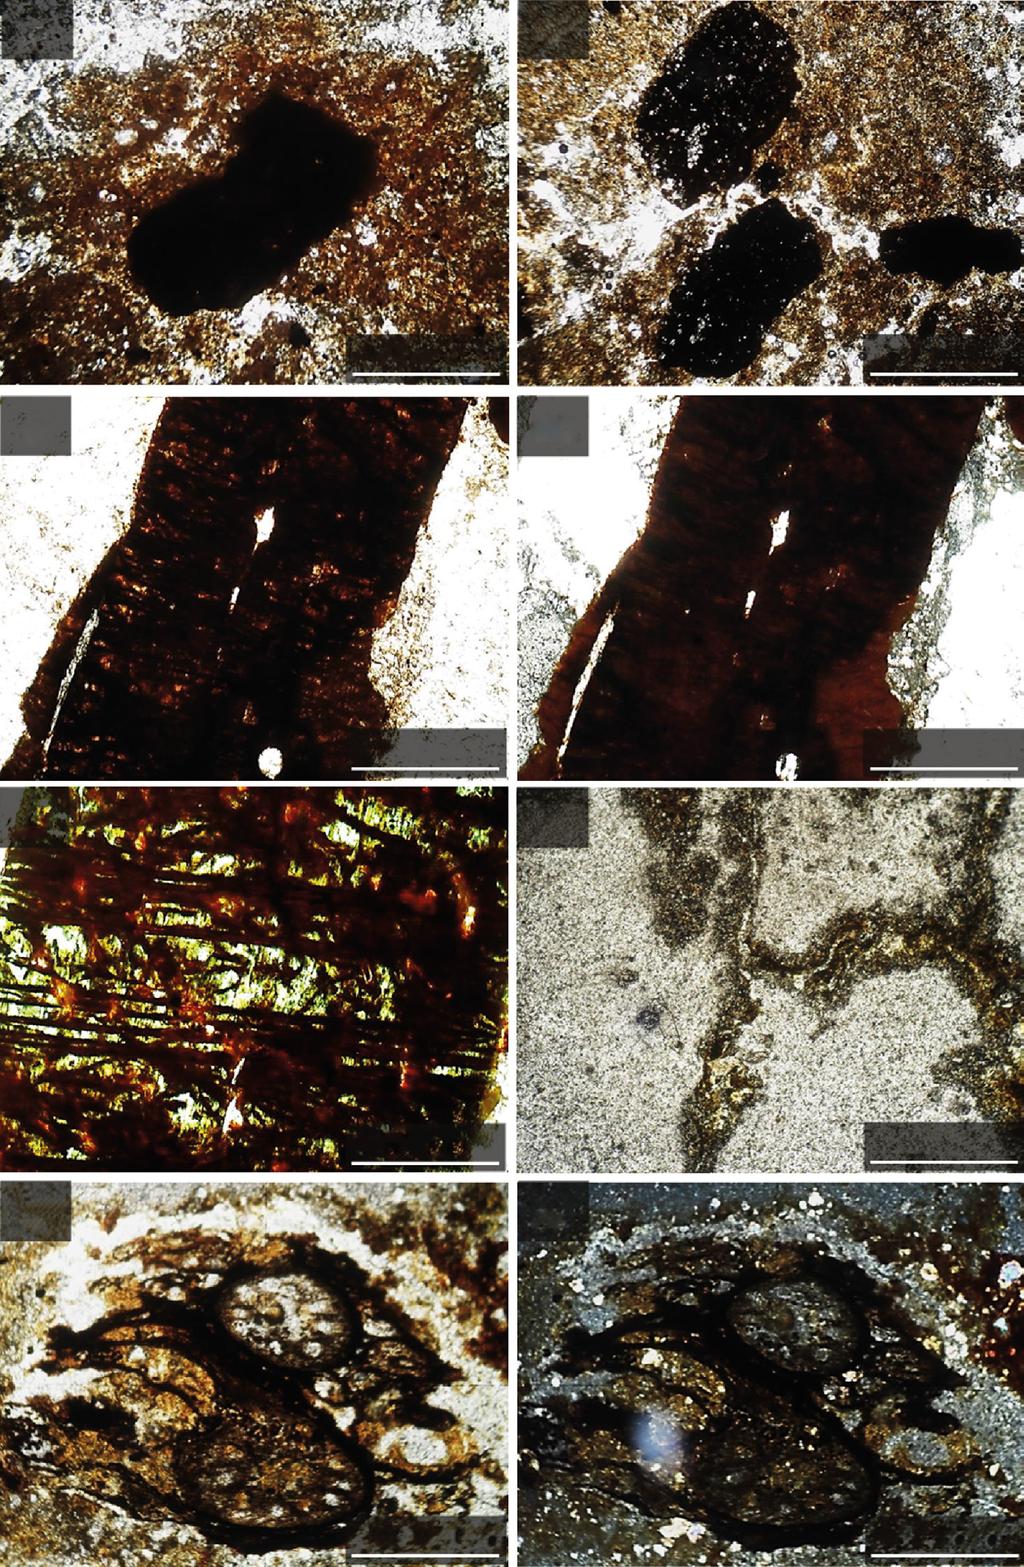 Brilhante et al. Weathering of rhyolites and soil formation in an Atlantic Forest... (a) (b) 1 mm (c) 1 mm (d) 250 µm (e) 250 µm (f) 125 µm 500 µm (h) (g) 1 mm 1 mm Figure 4.